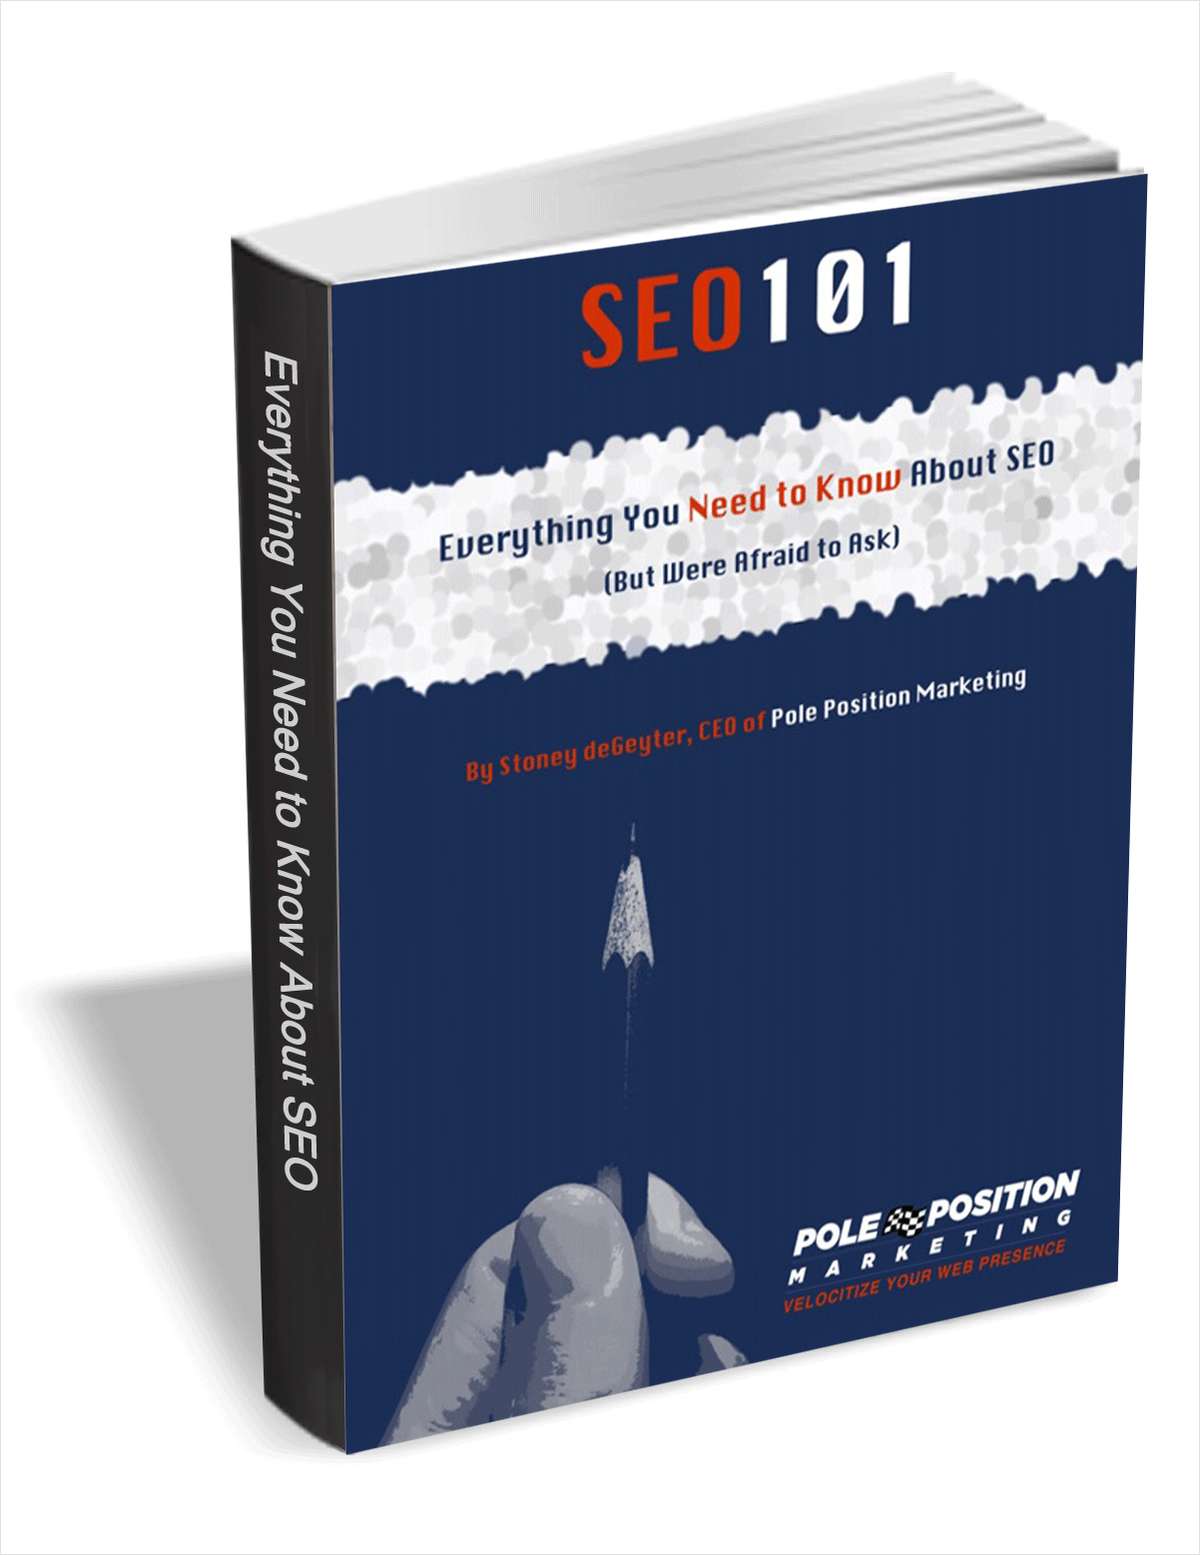 SEO 101 - Everything You Need to Know About SEO (But Were Afraid to Ask)